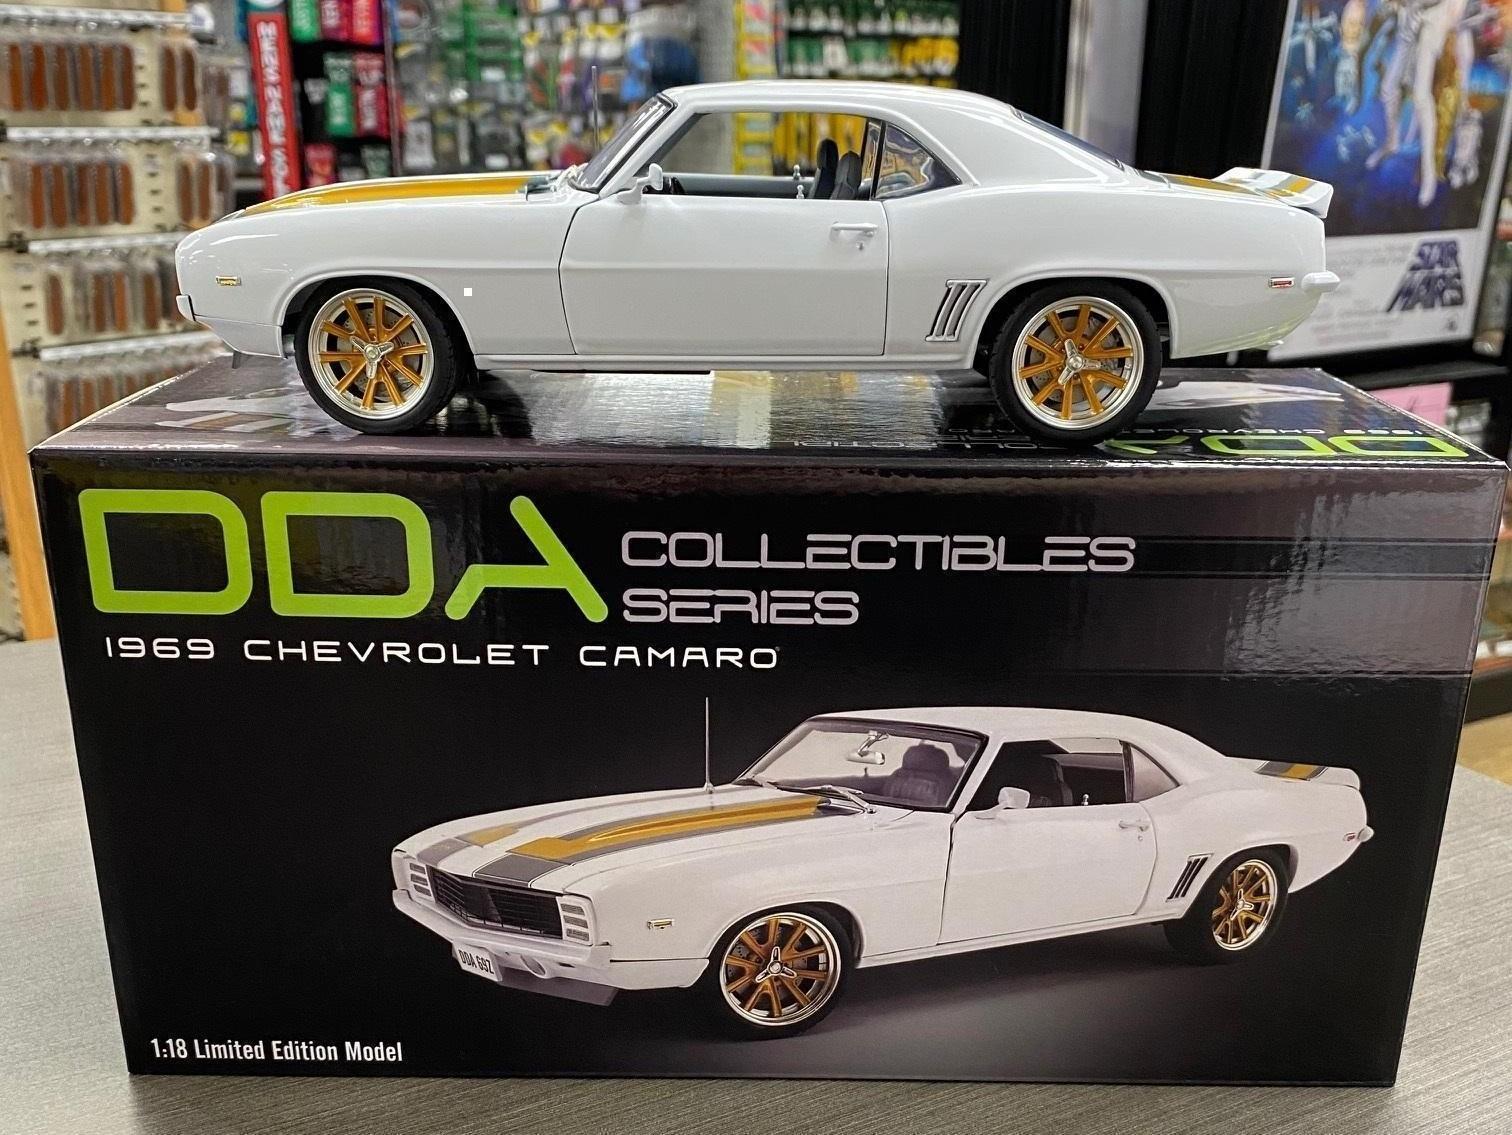 1969 Chevrolet Camaro White with Gold and Grey Stripes 1:18 Scale Diecast Model Car